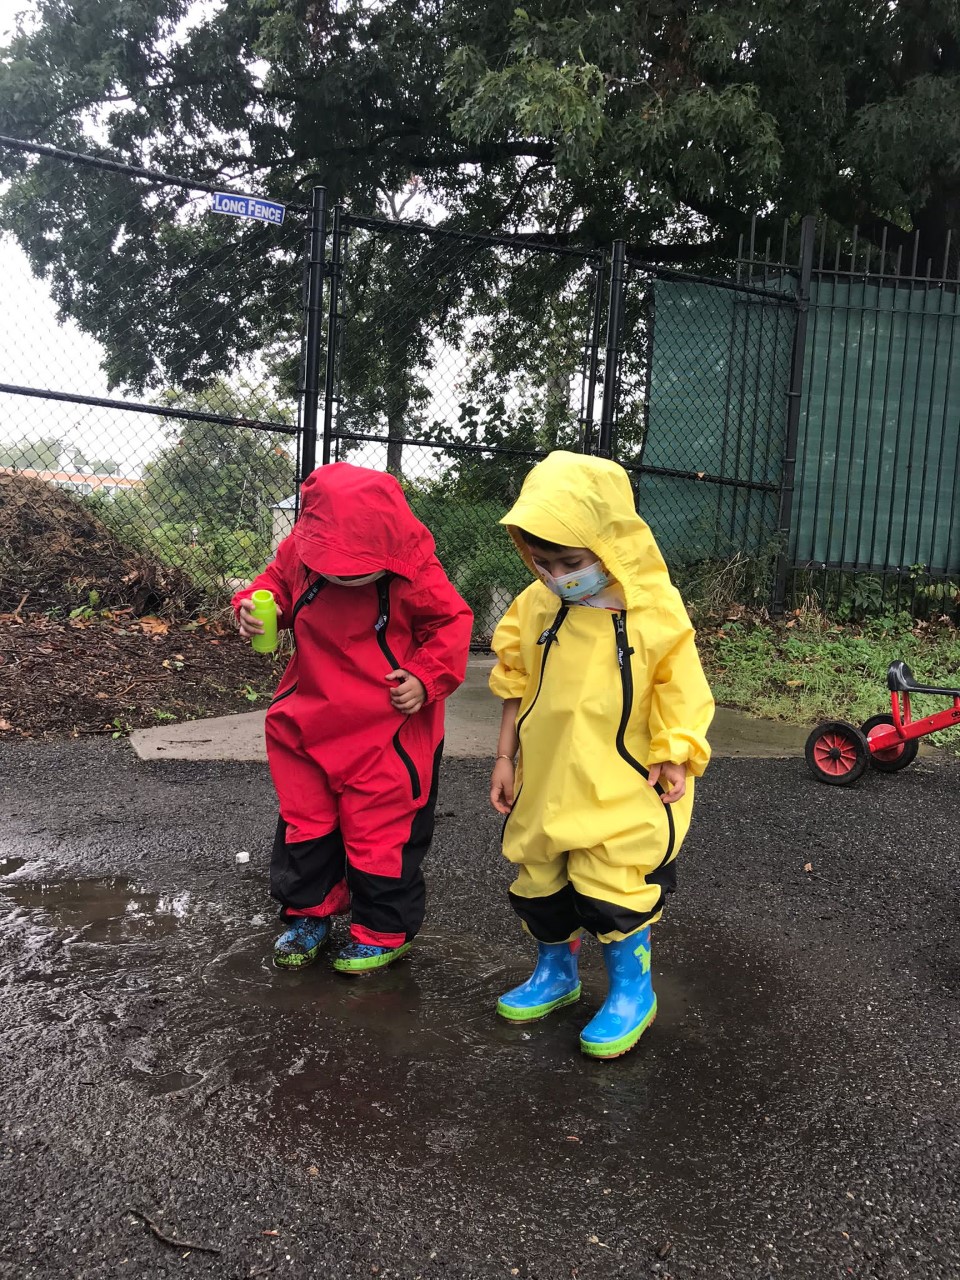 Two children in rain suits explore a puddle